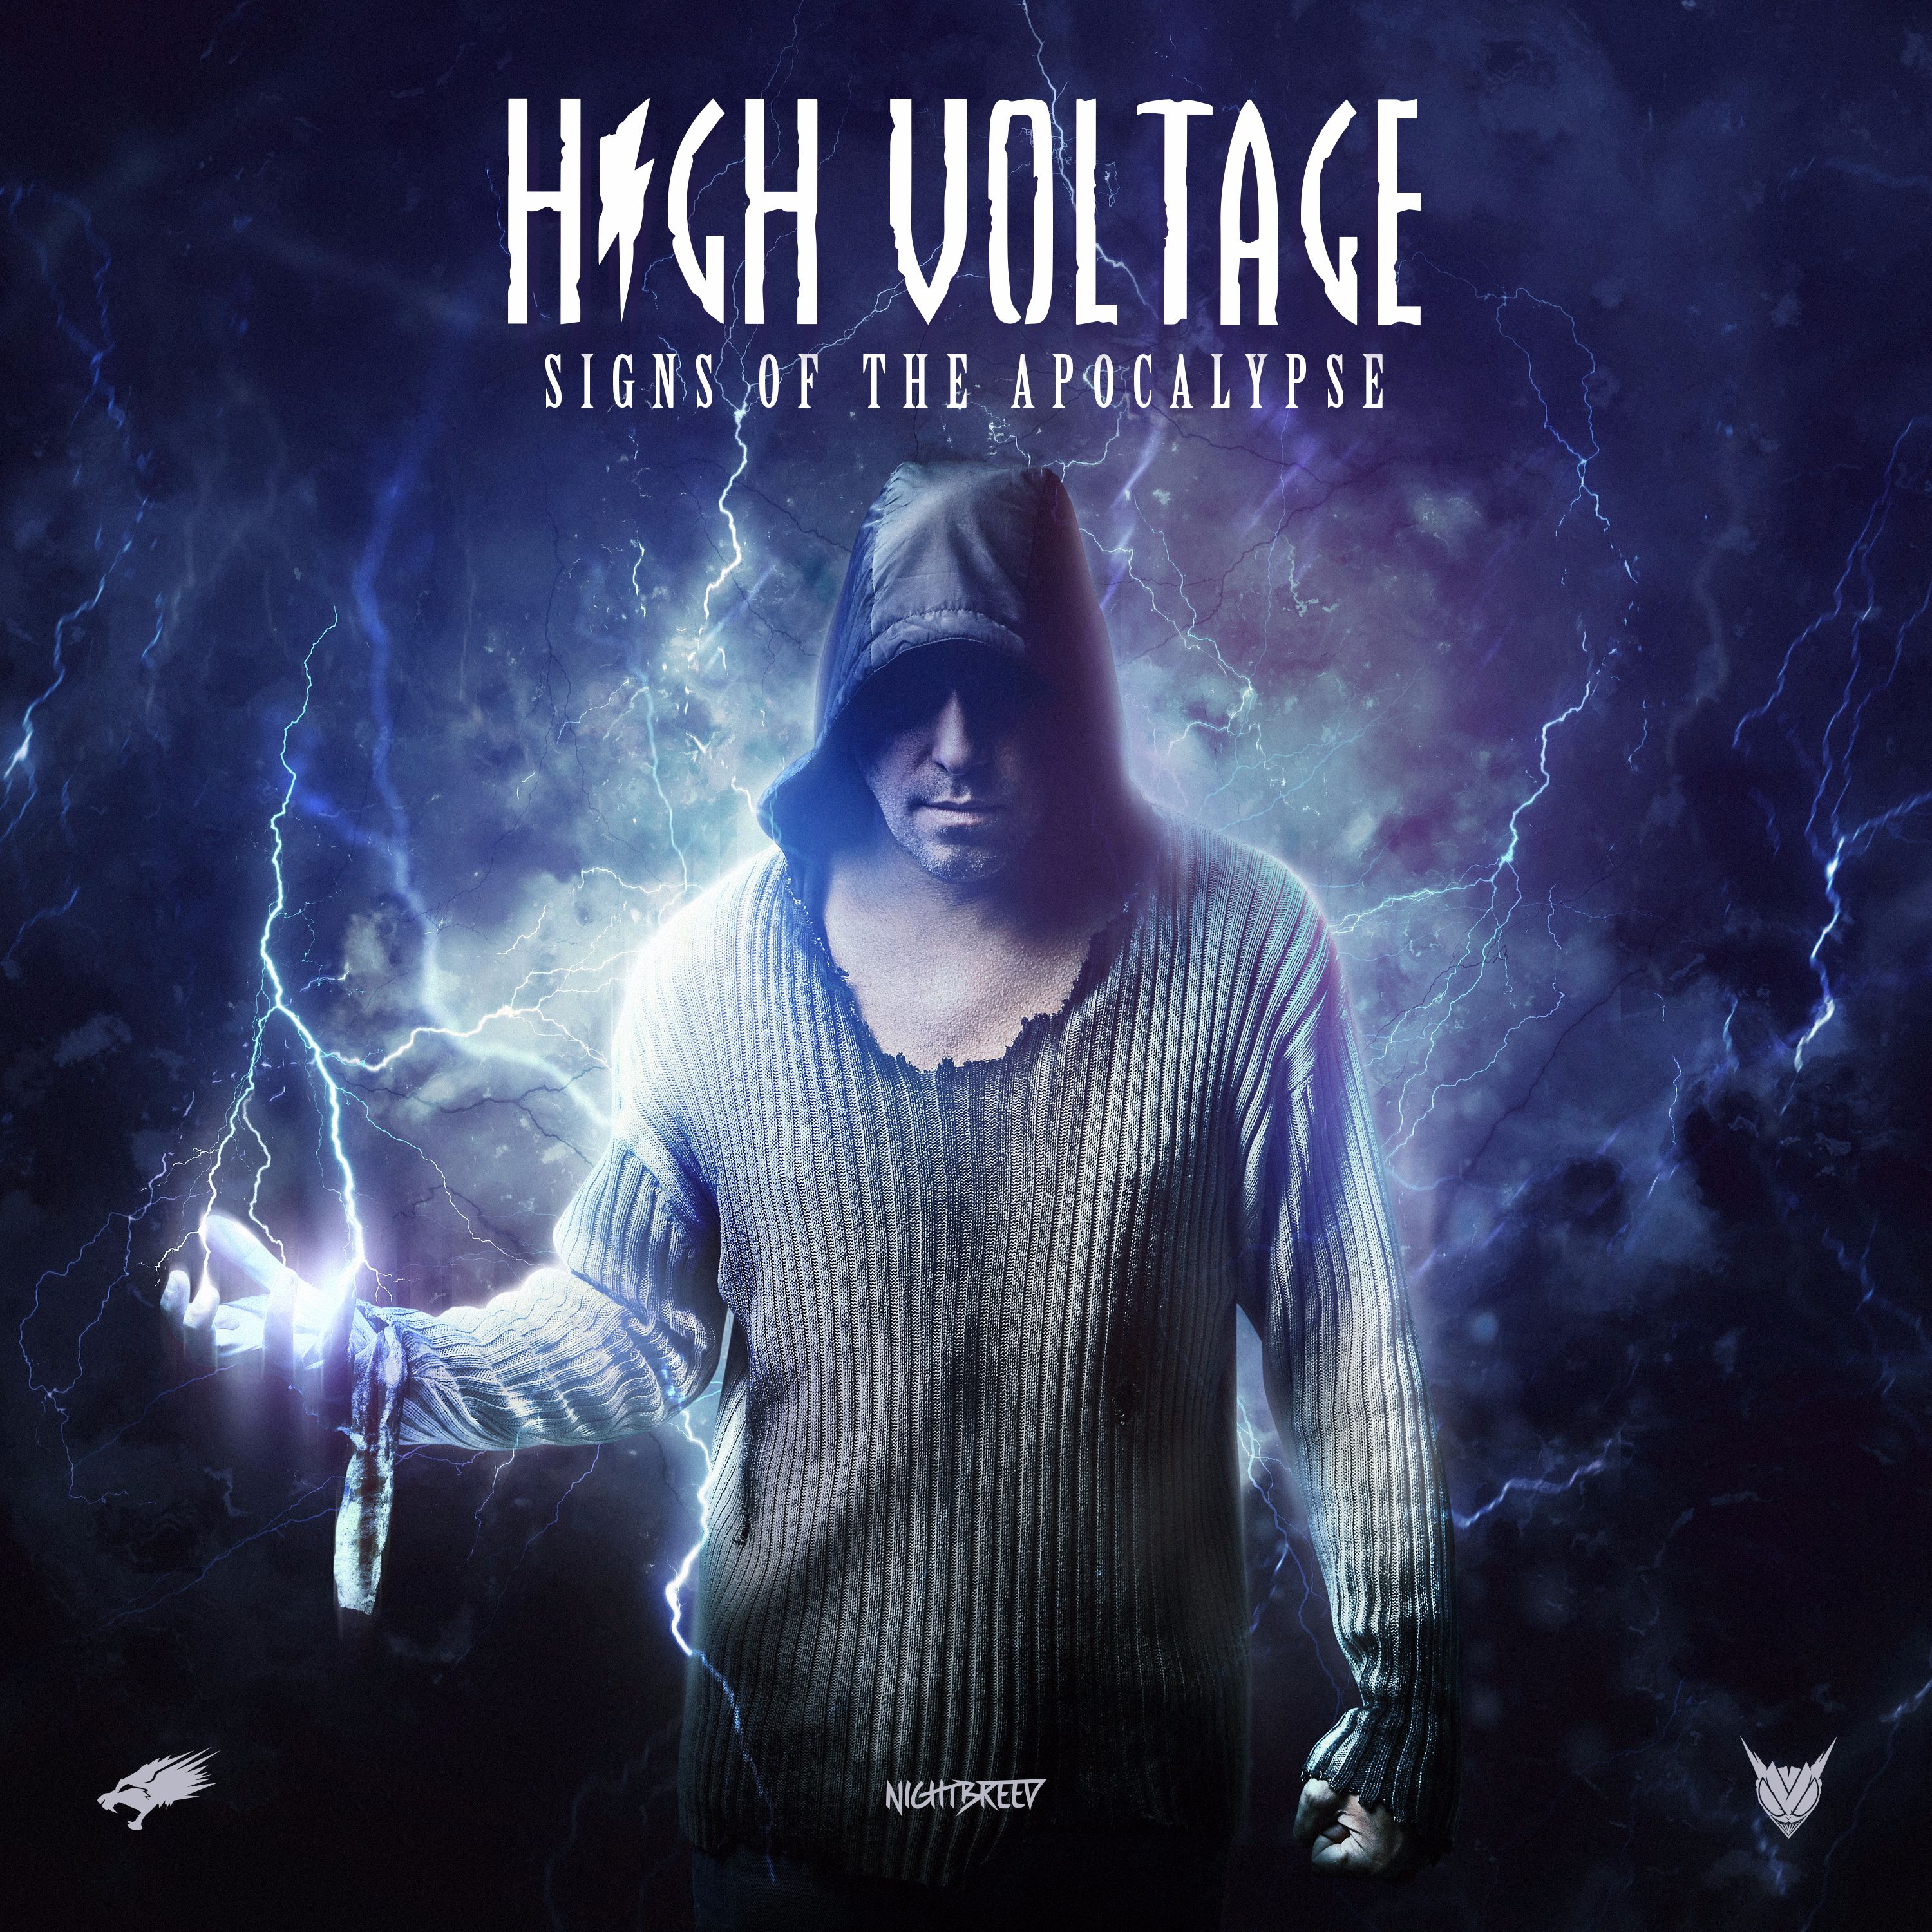 High Voltage - Signs Of The Apocalypse [NIGHTBREED RECORDS] NBN010